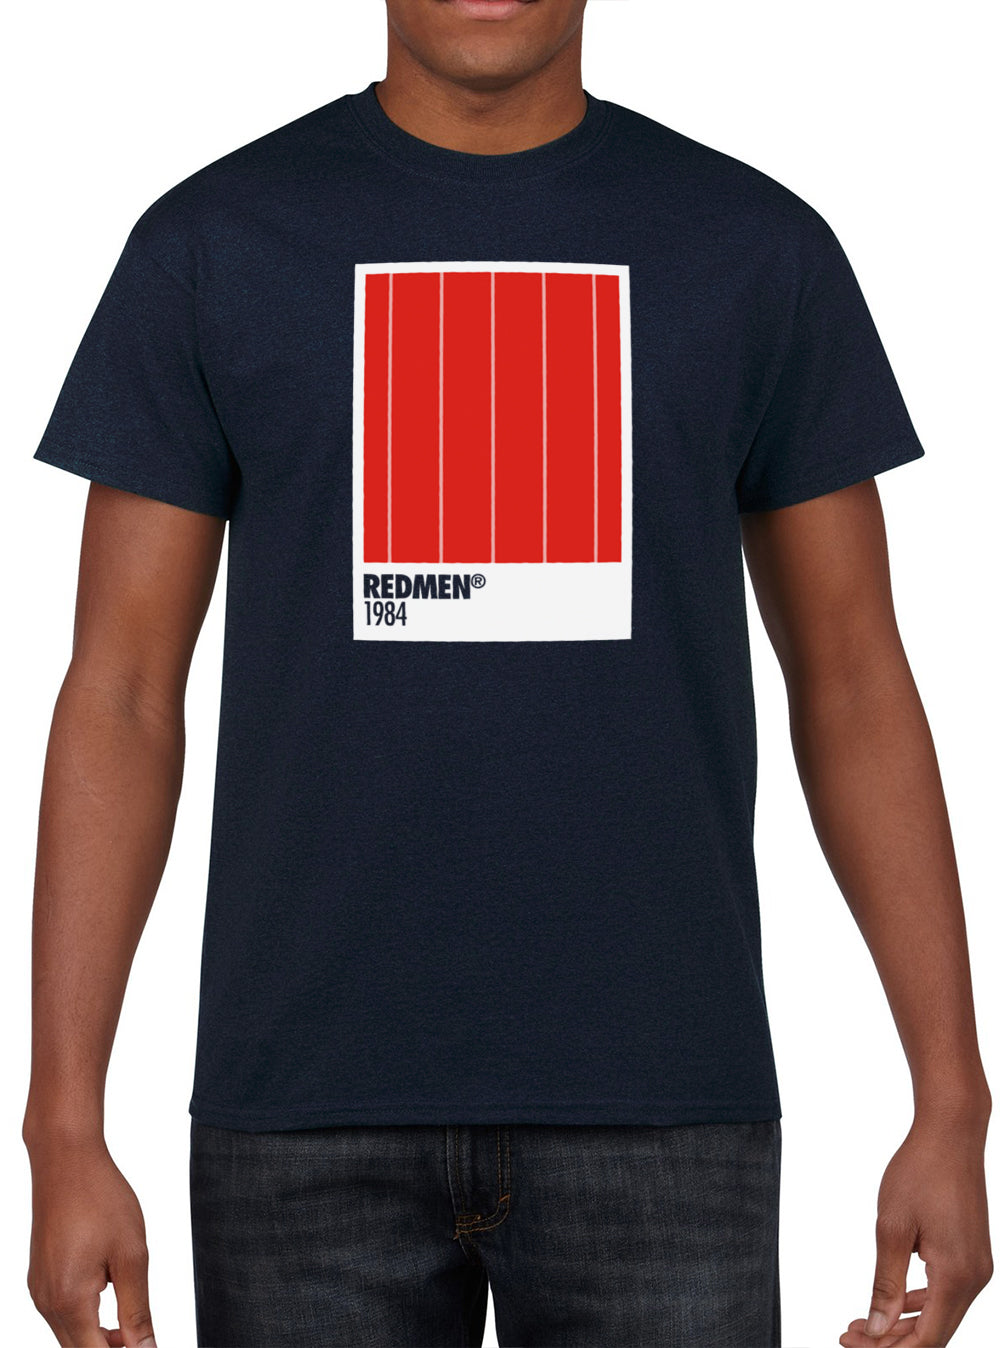 03 ALL MY COLOURS 'Redmen 1984 Homefront' Edition Tee